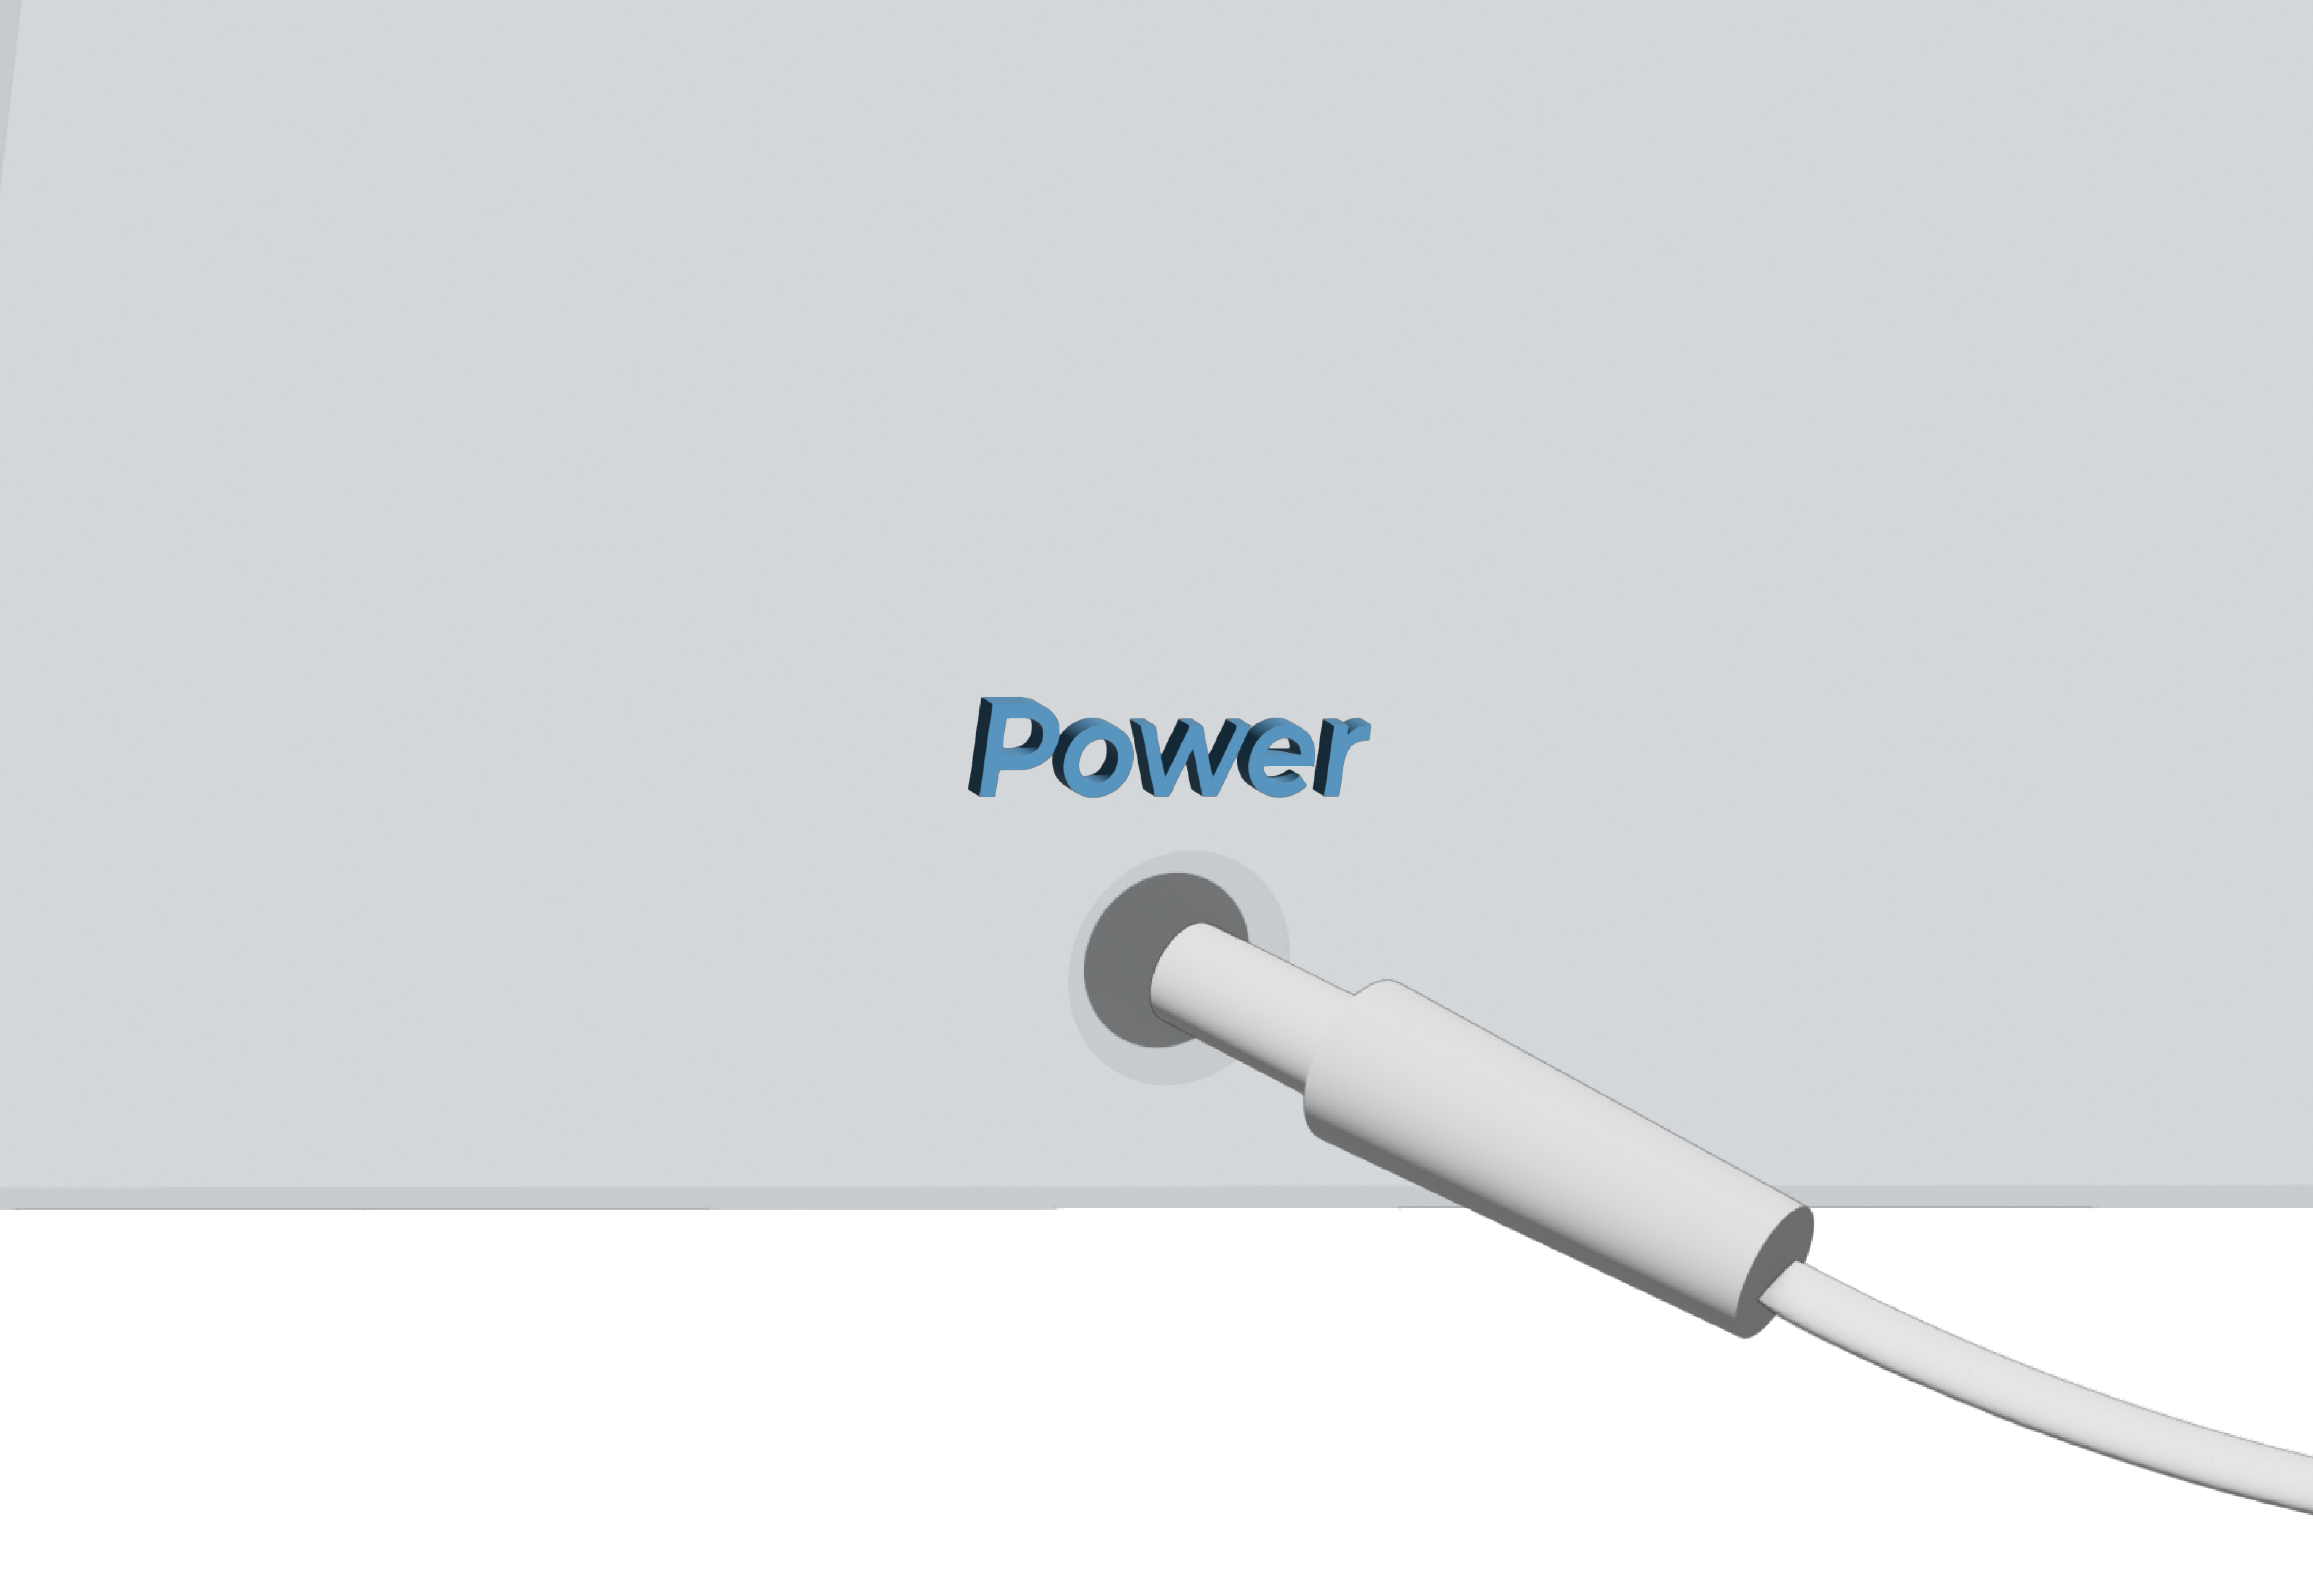 Tutorial illustration of plugging power cable into internet router